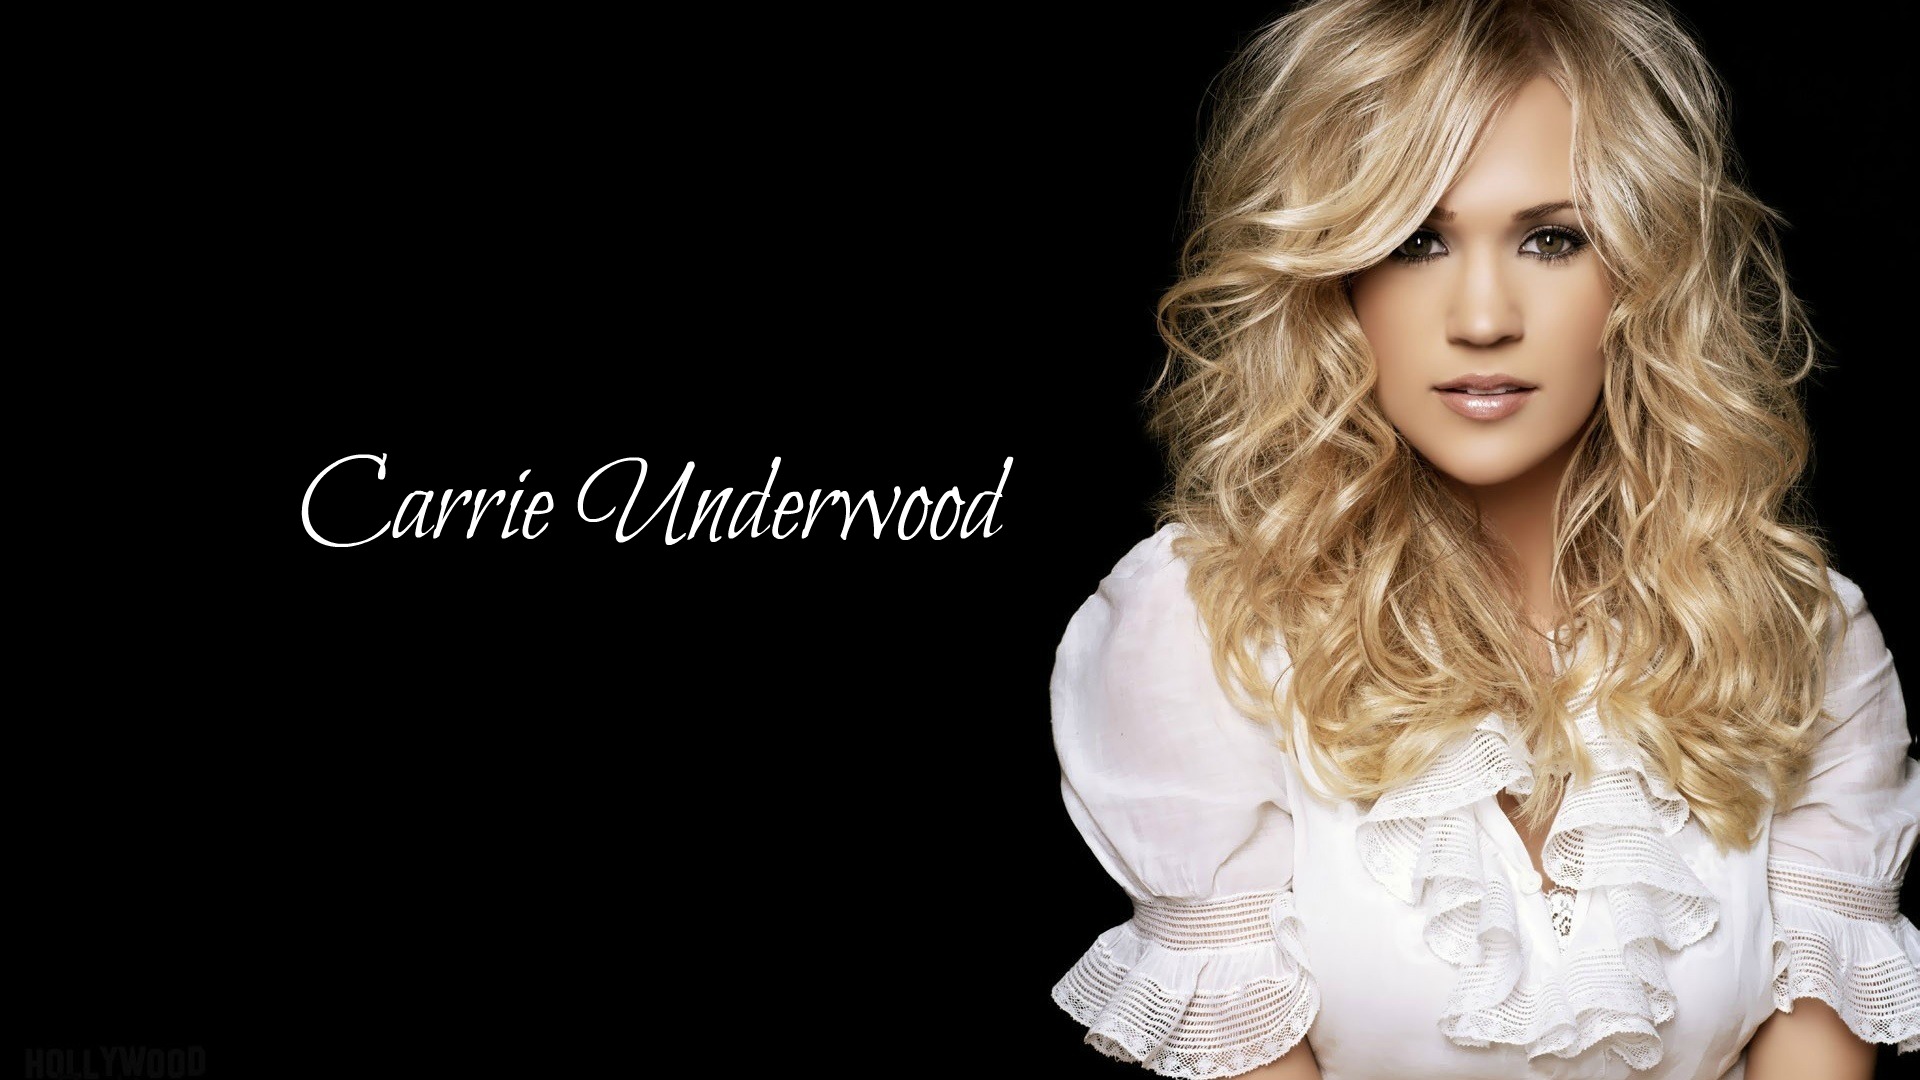 Carrie Wallpapers  Wallpaper Cave